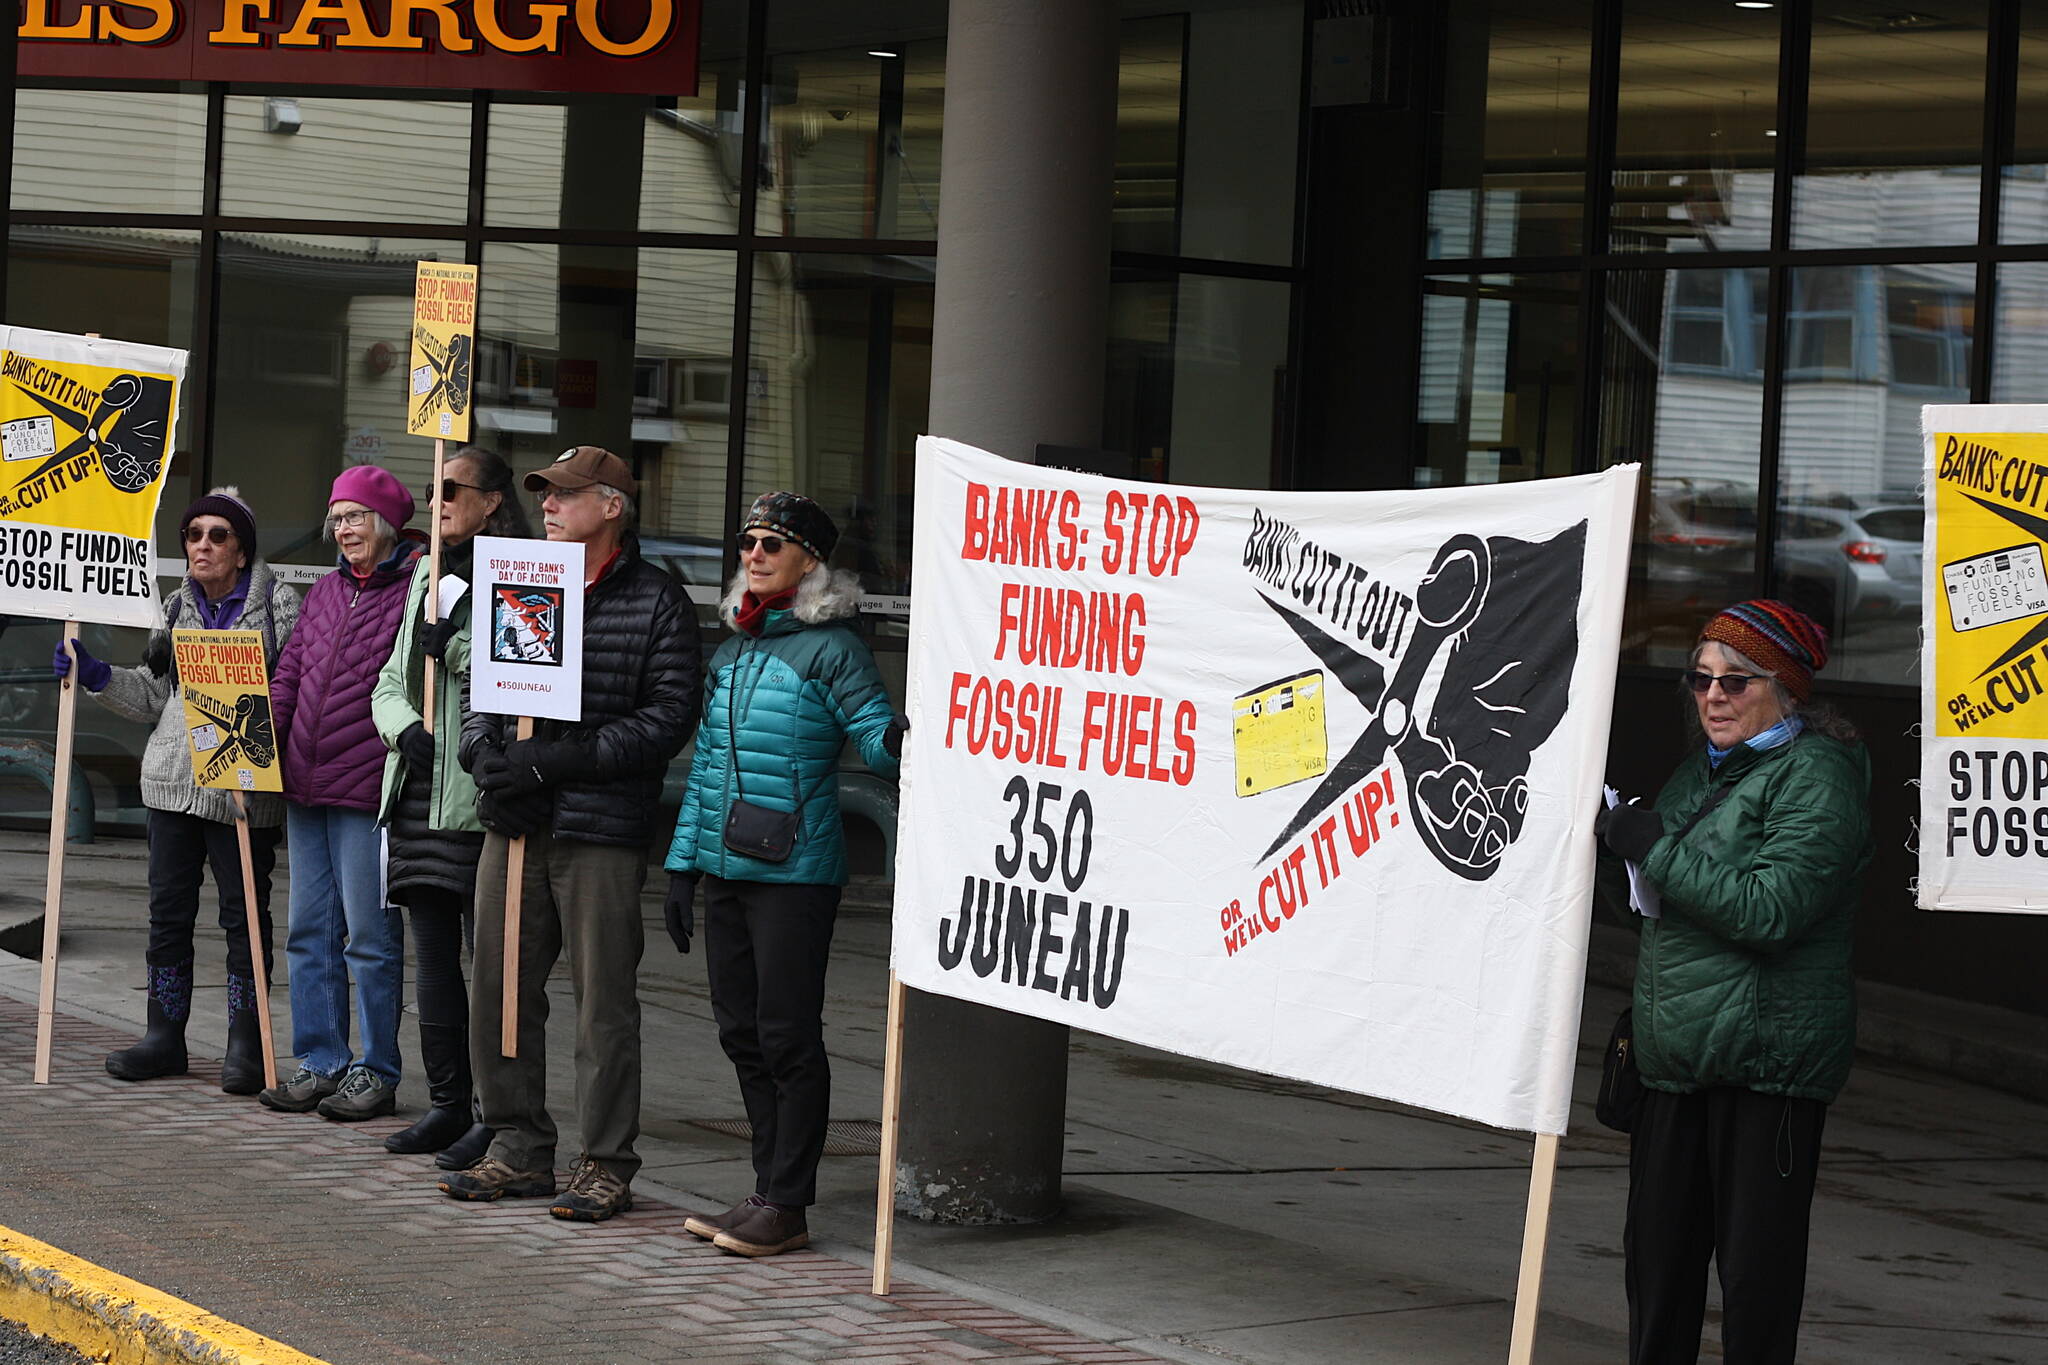 About 25 protesters gather outside the Wells Fargo branch in downtown Juneau at midday Tuesday, calling upon banks to halt financing of fossil fuel development projects. (Mark Sabbatini / Juneau Empire)